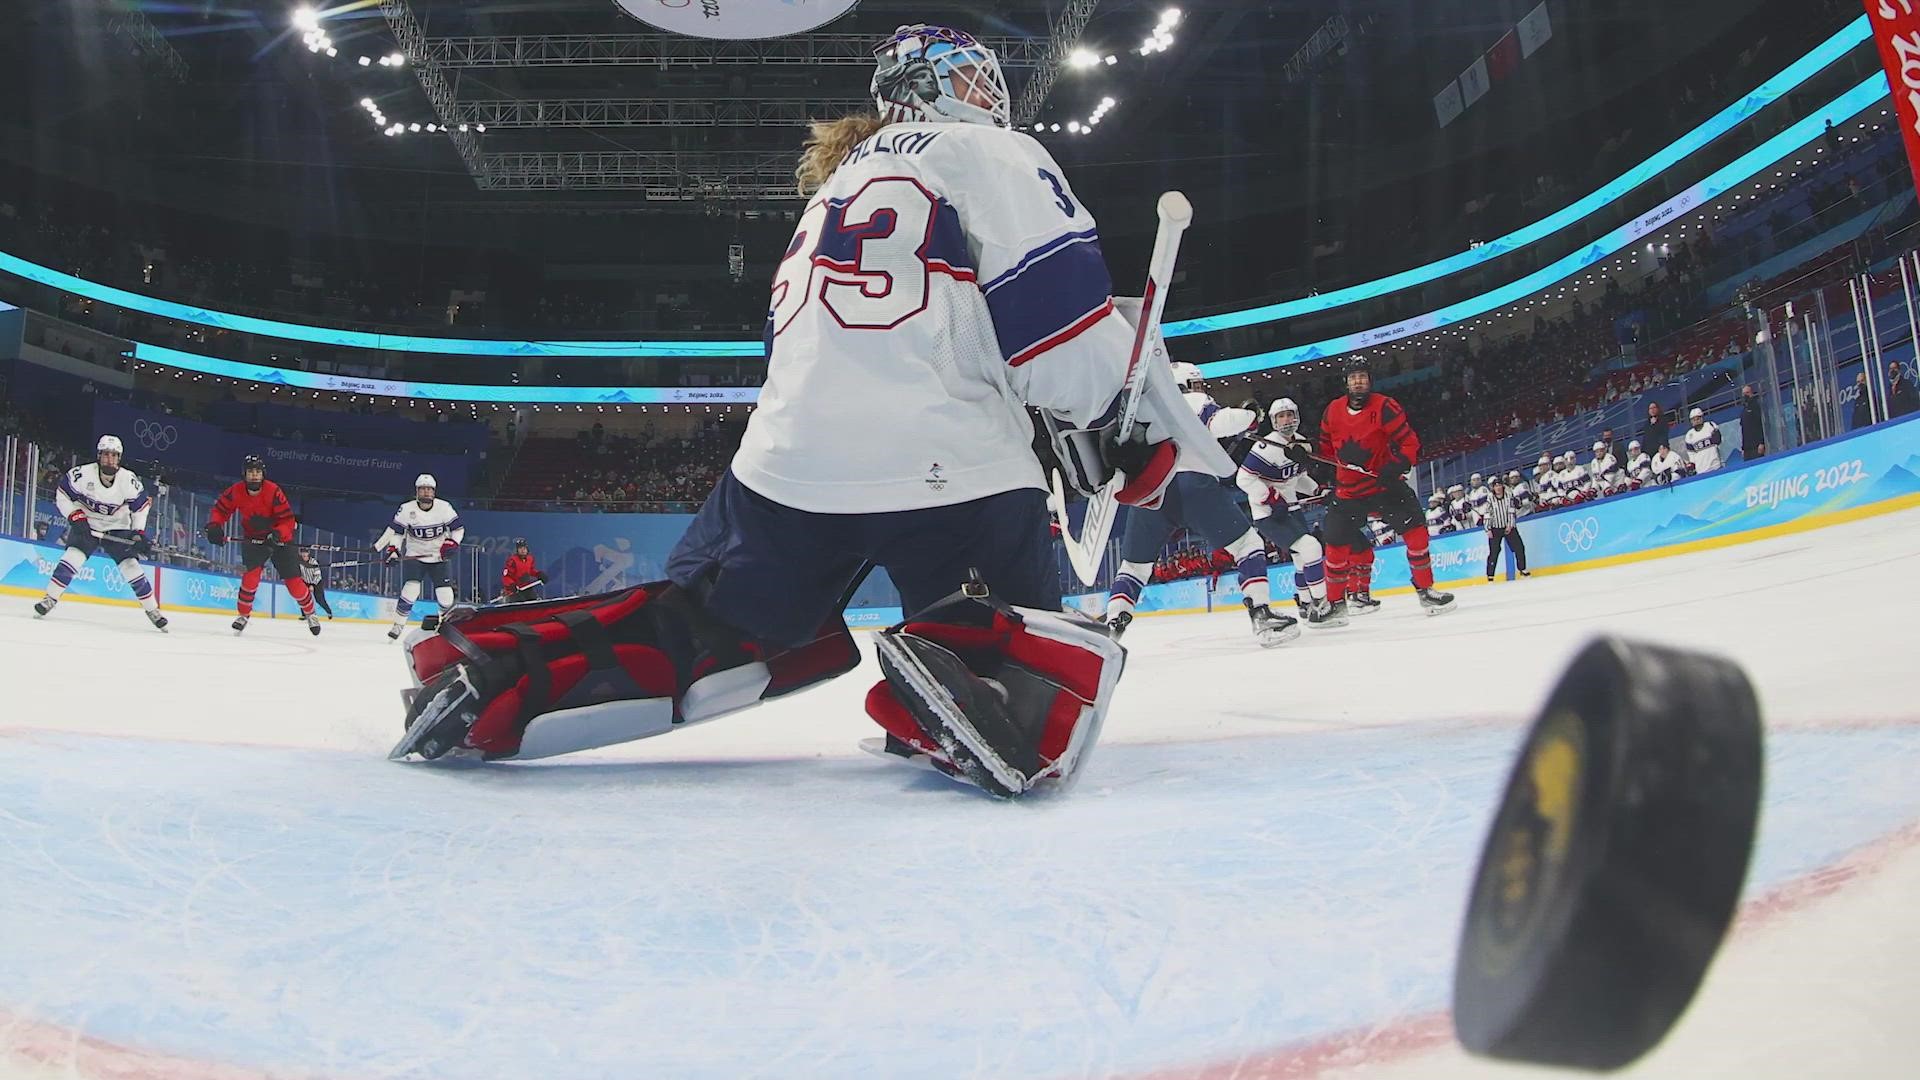 Canada defeated defending gold medalists Team USA by a score of 3-2.